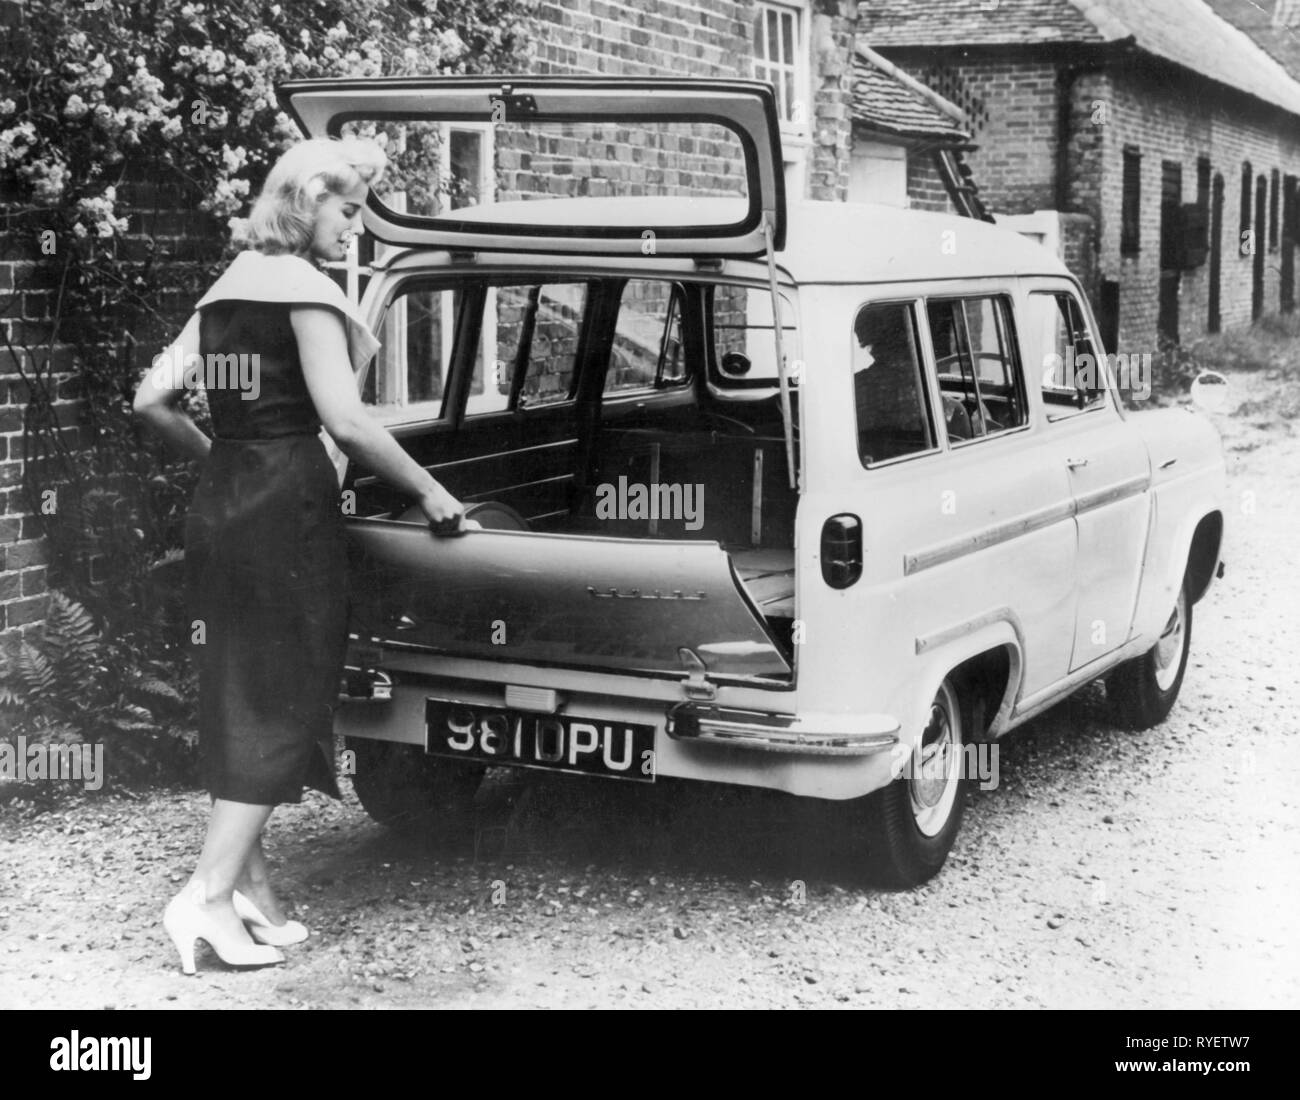 Transport / Transports, location de véhicules, véhicules, Ford Squire, jeune femme déboulonnage de l'initialisation, Dagenham, Essex, Angleterre, 12.10.1955, Additional-Rights Clearance-Info-Not-Available- Banque D'Images